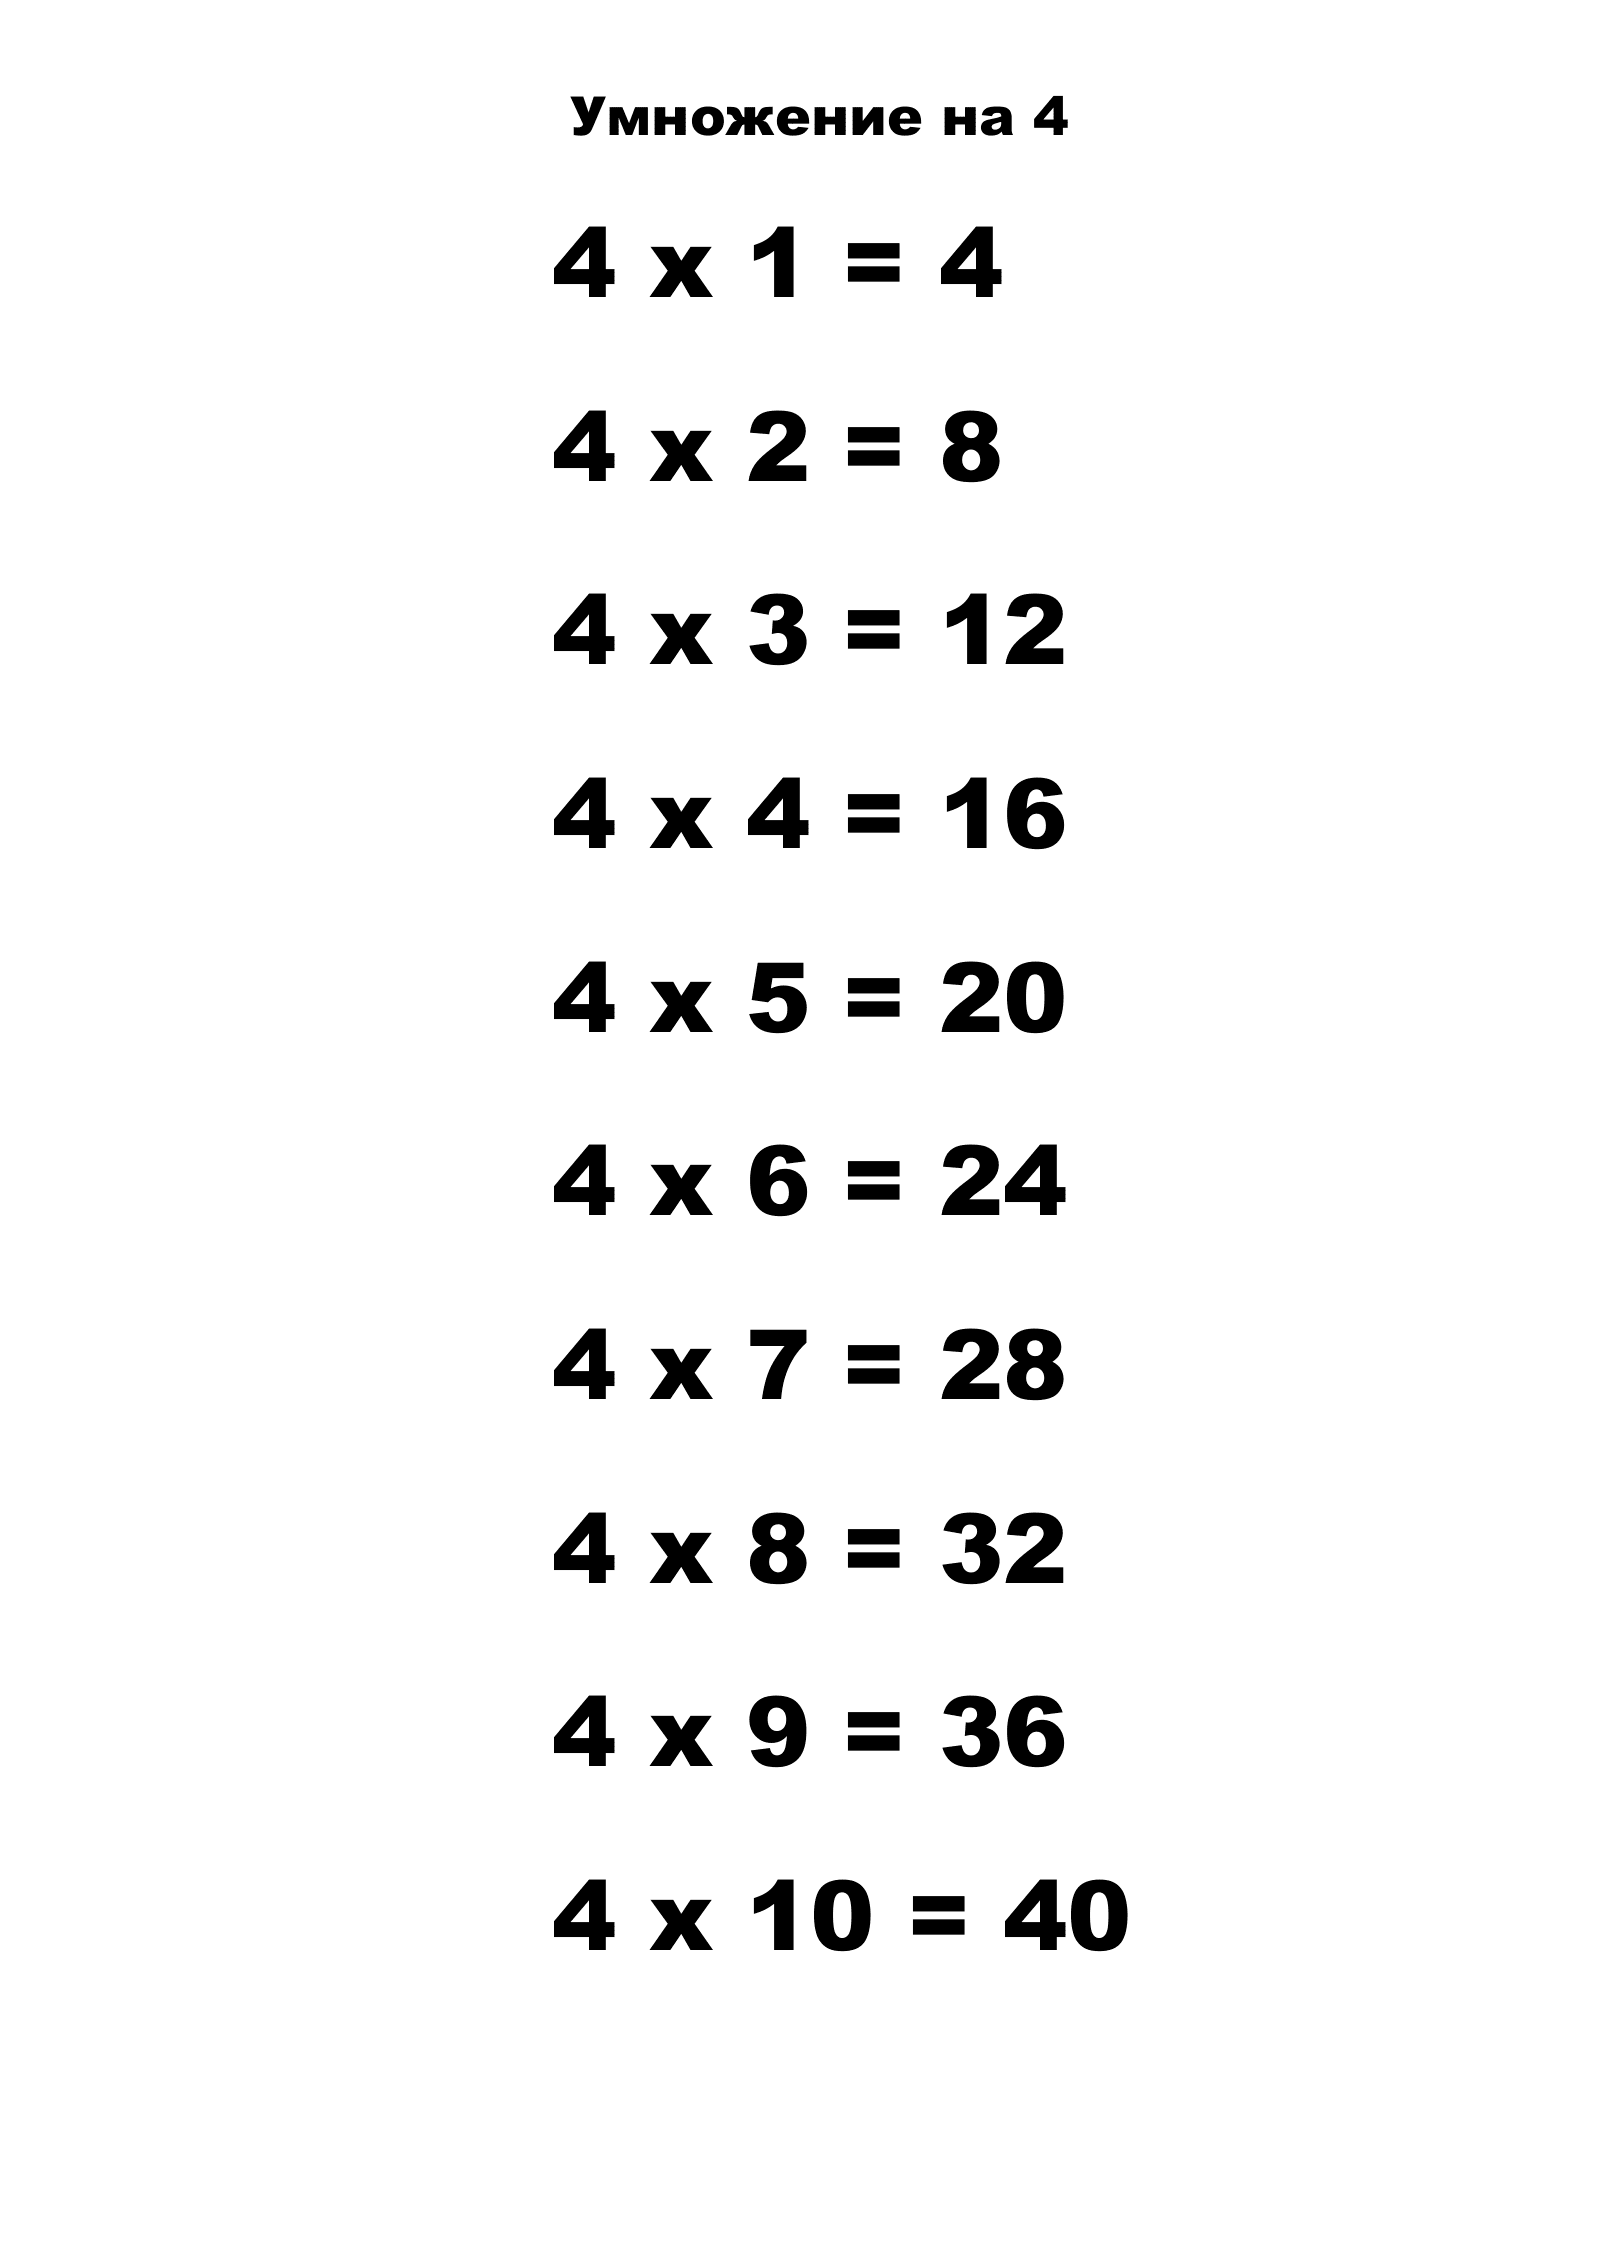 Multiplication Table for 4. Print